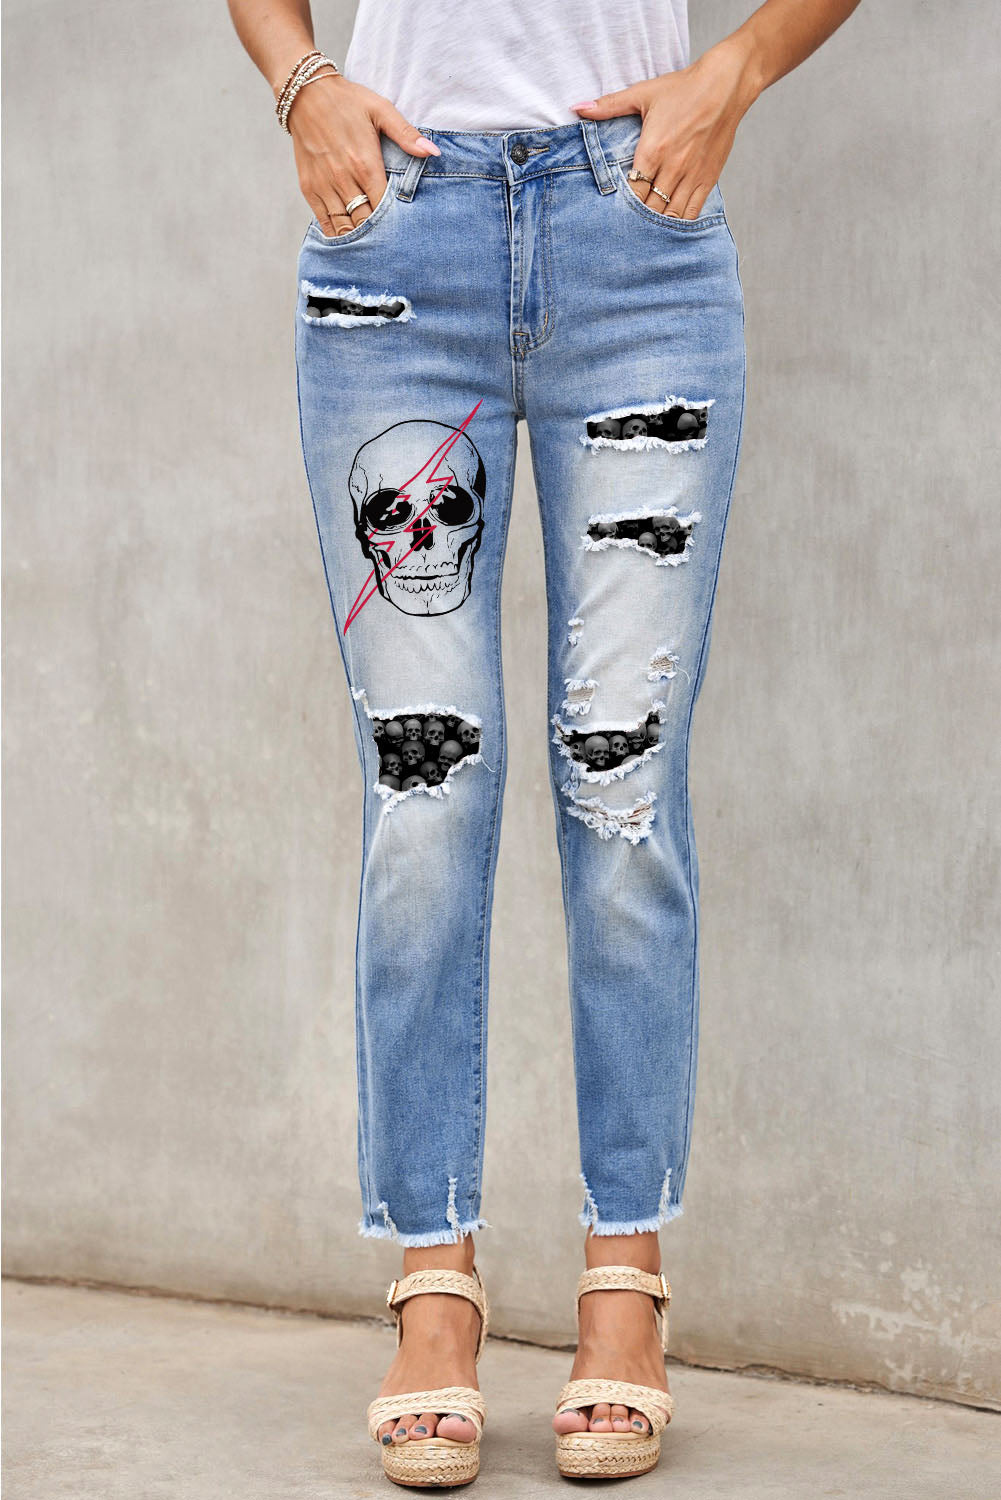 Sky Blue Casual Floral Skull Print Jean For Women LC787685-4